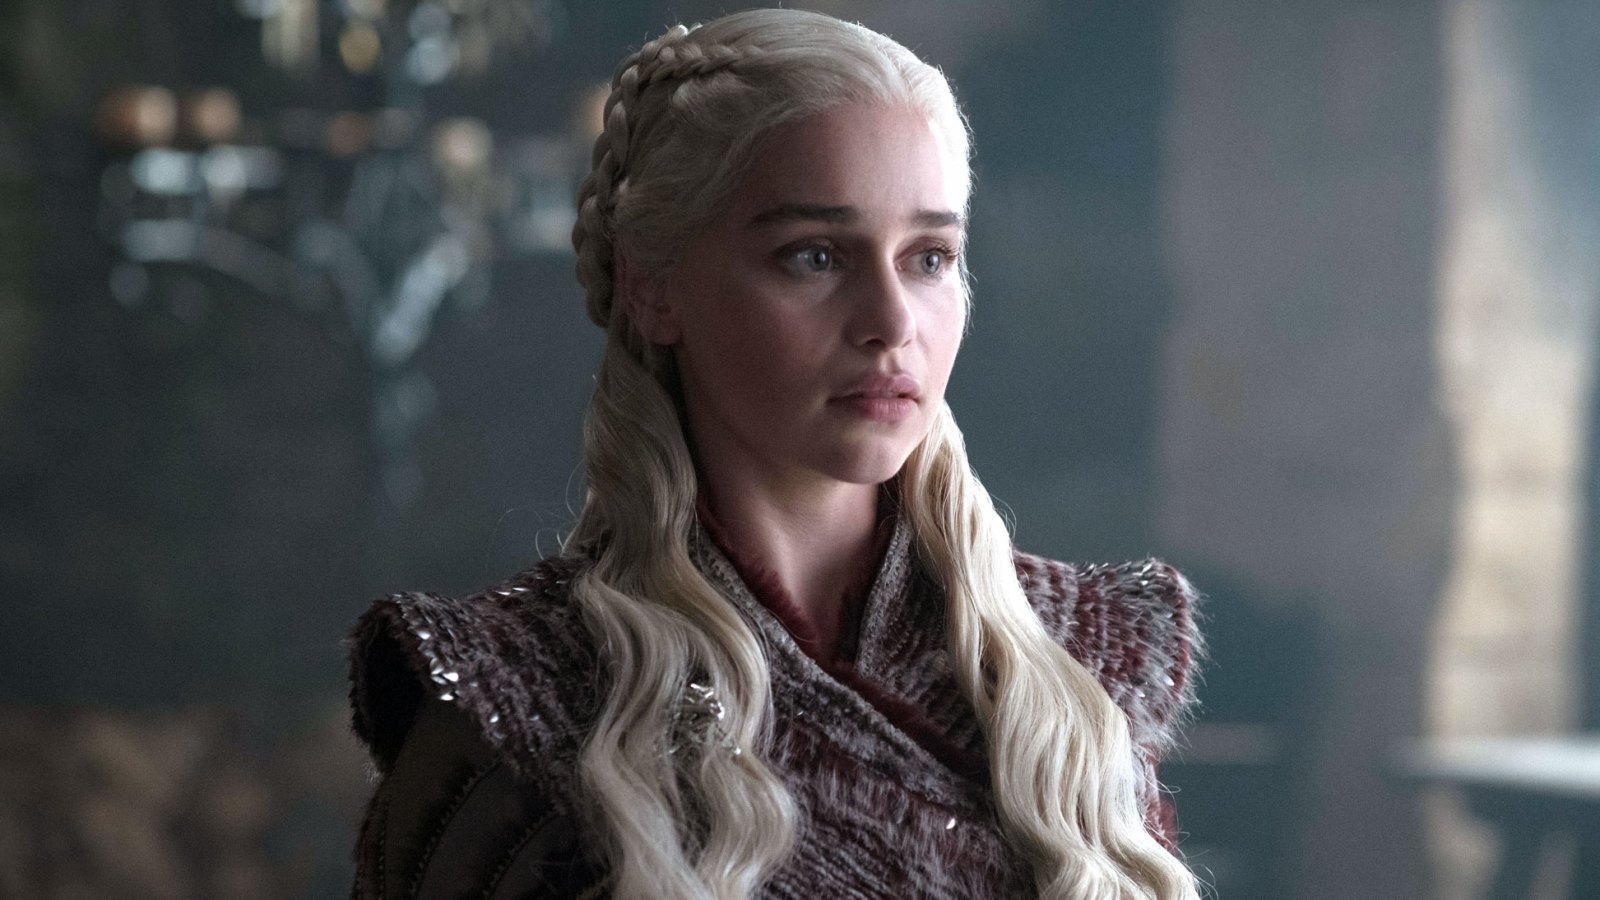 Game of Thrones' Emilia Clarke Says She Was Told She'd 'Disappoint' Fans If She Didn't Do Nude Scenes